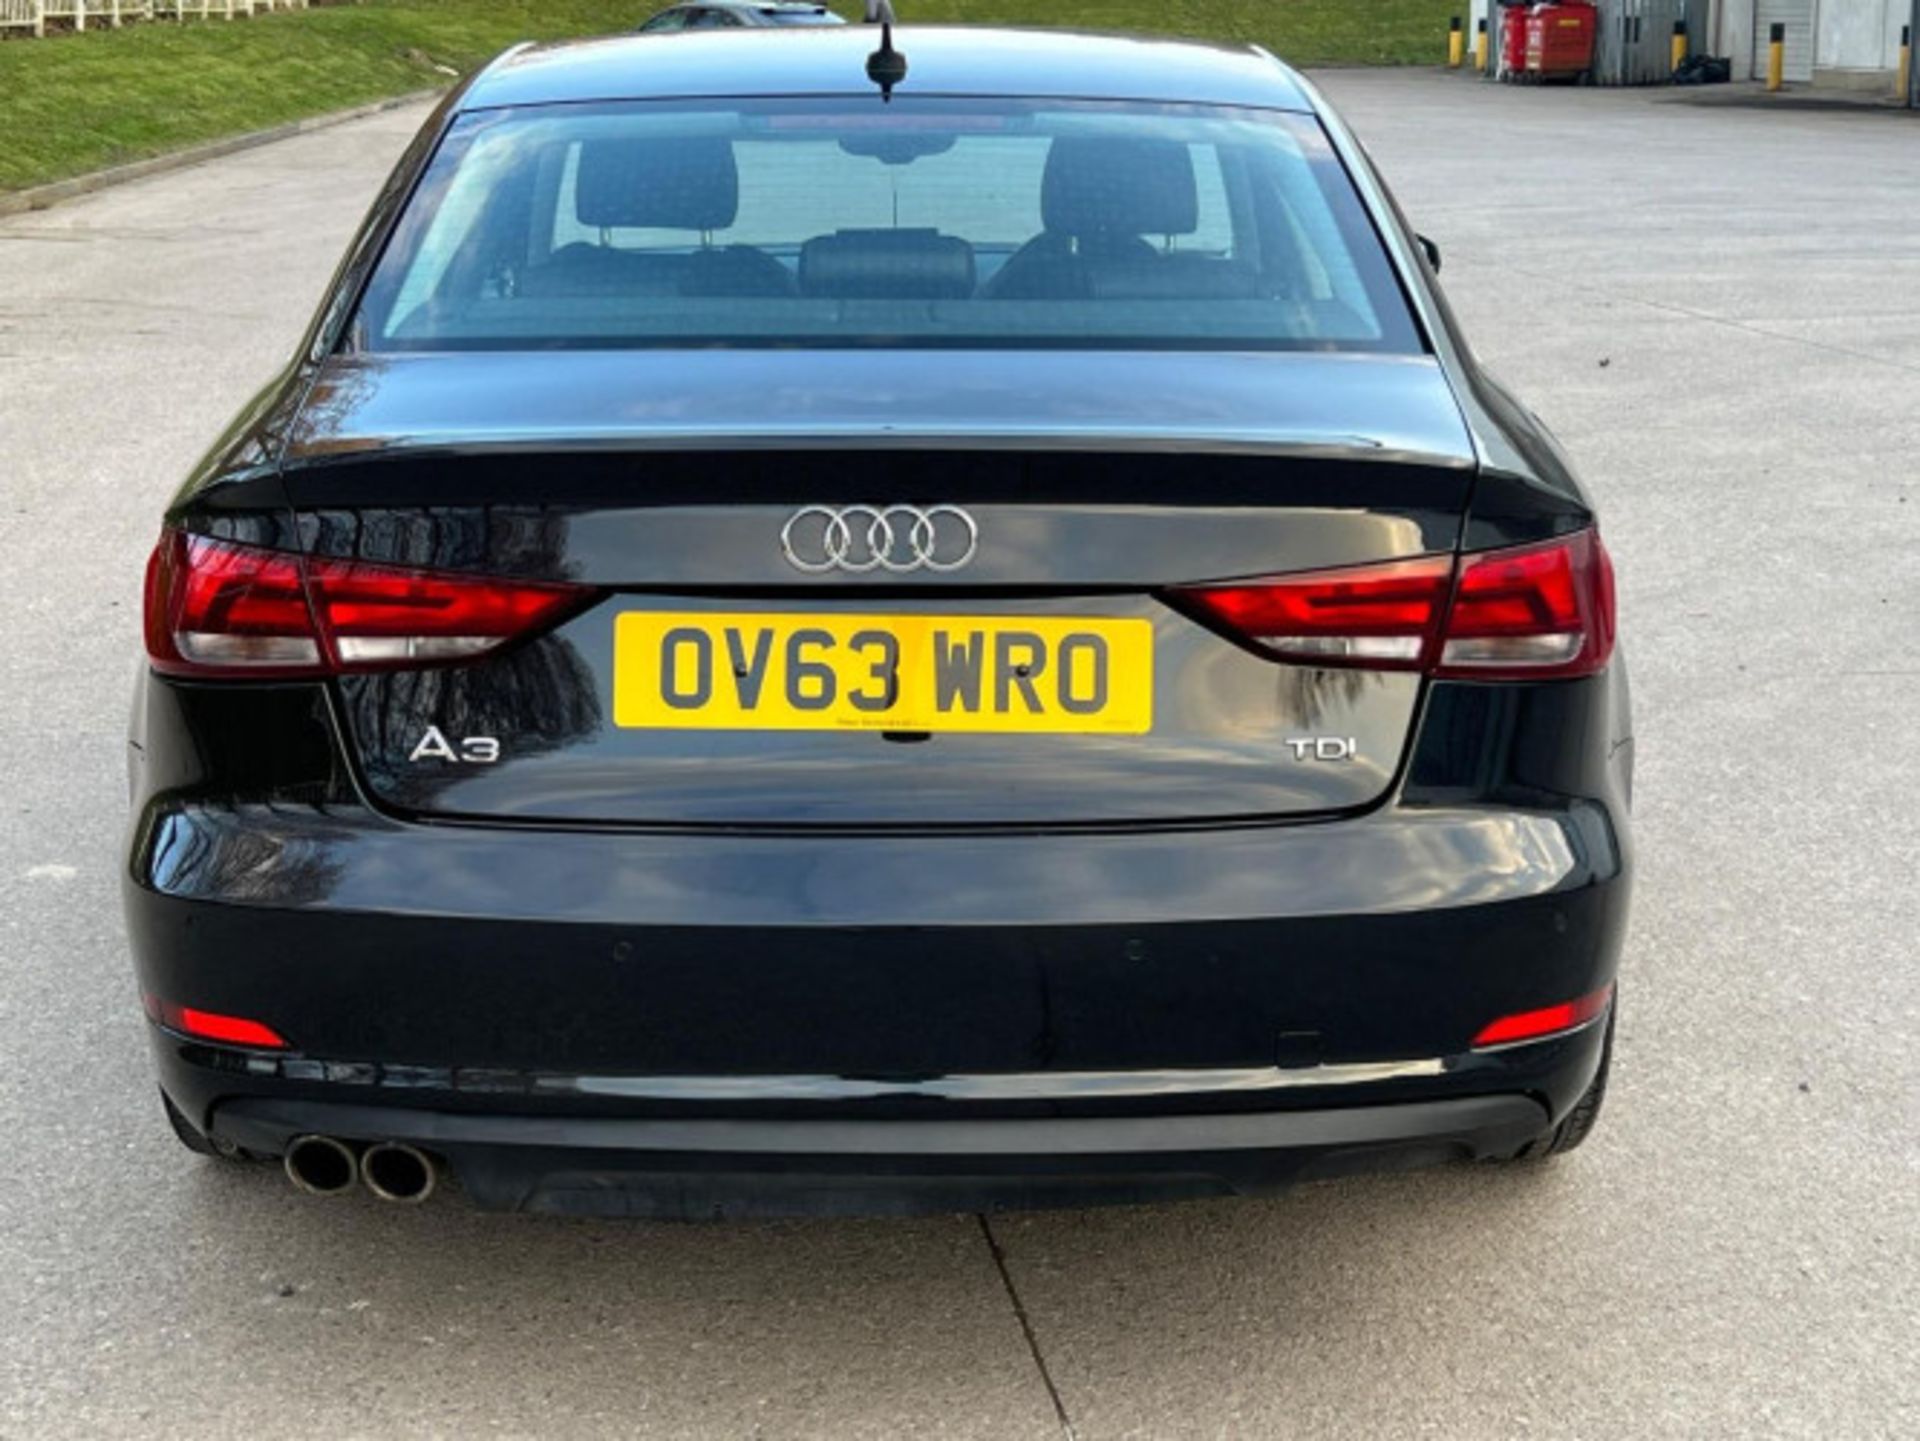 AUDI A3 2.0TDI SPORTBACK - STYLE, PERFORMANCE, AND COMFORT COMBINED >>--NO VAT ON HAMMER--<< - Image 205 of 216